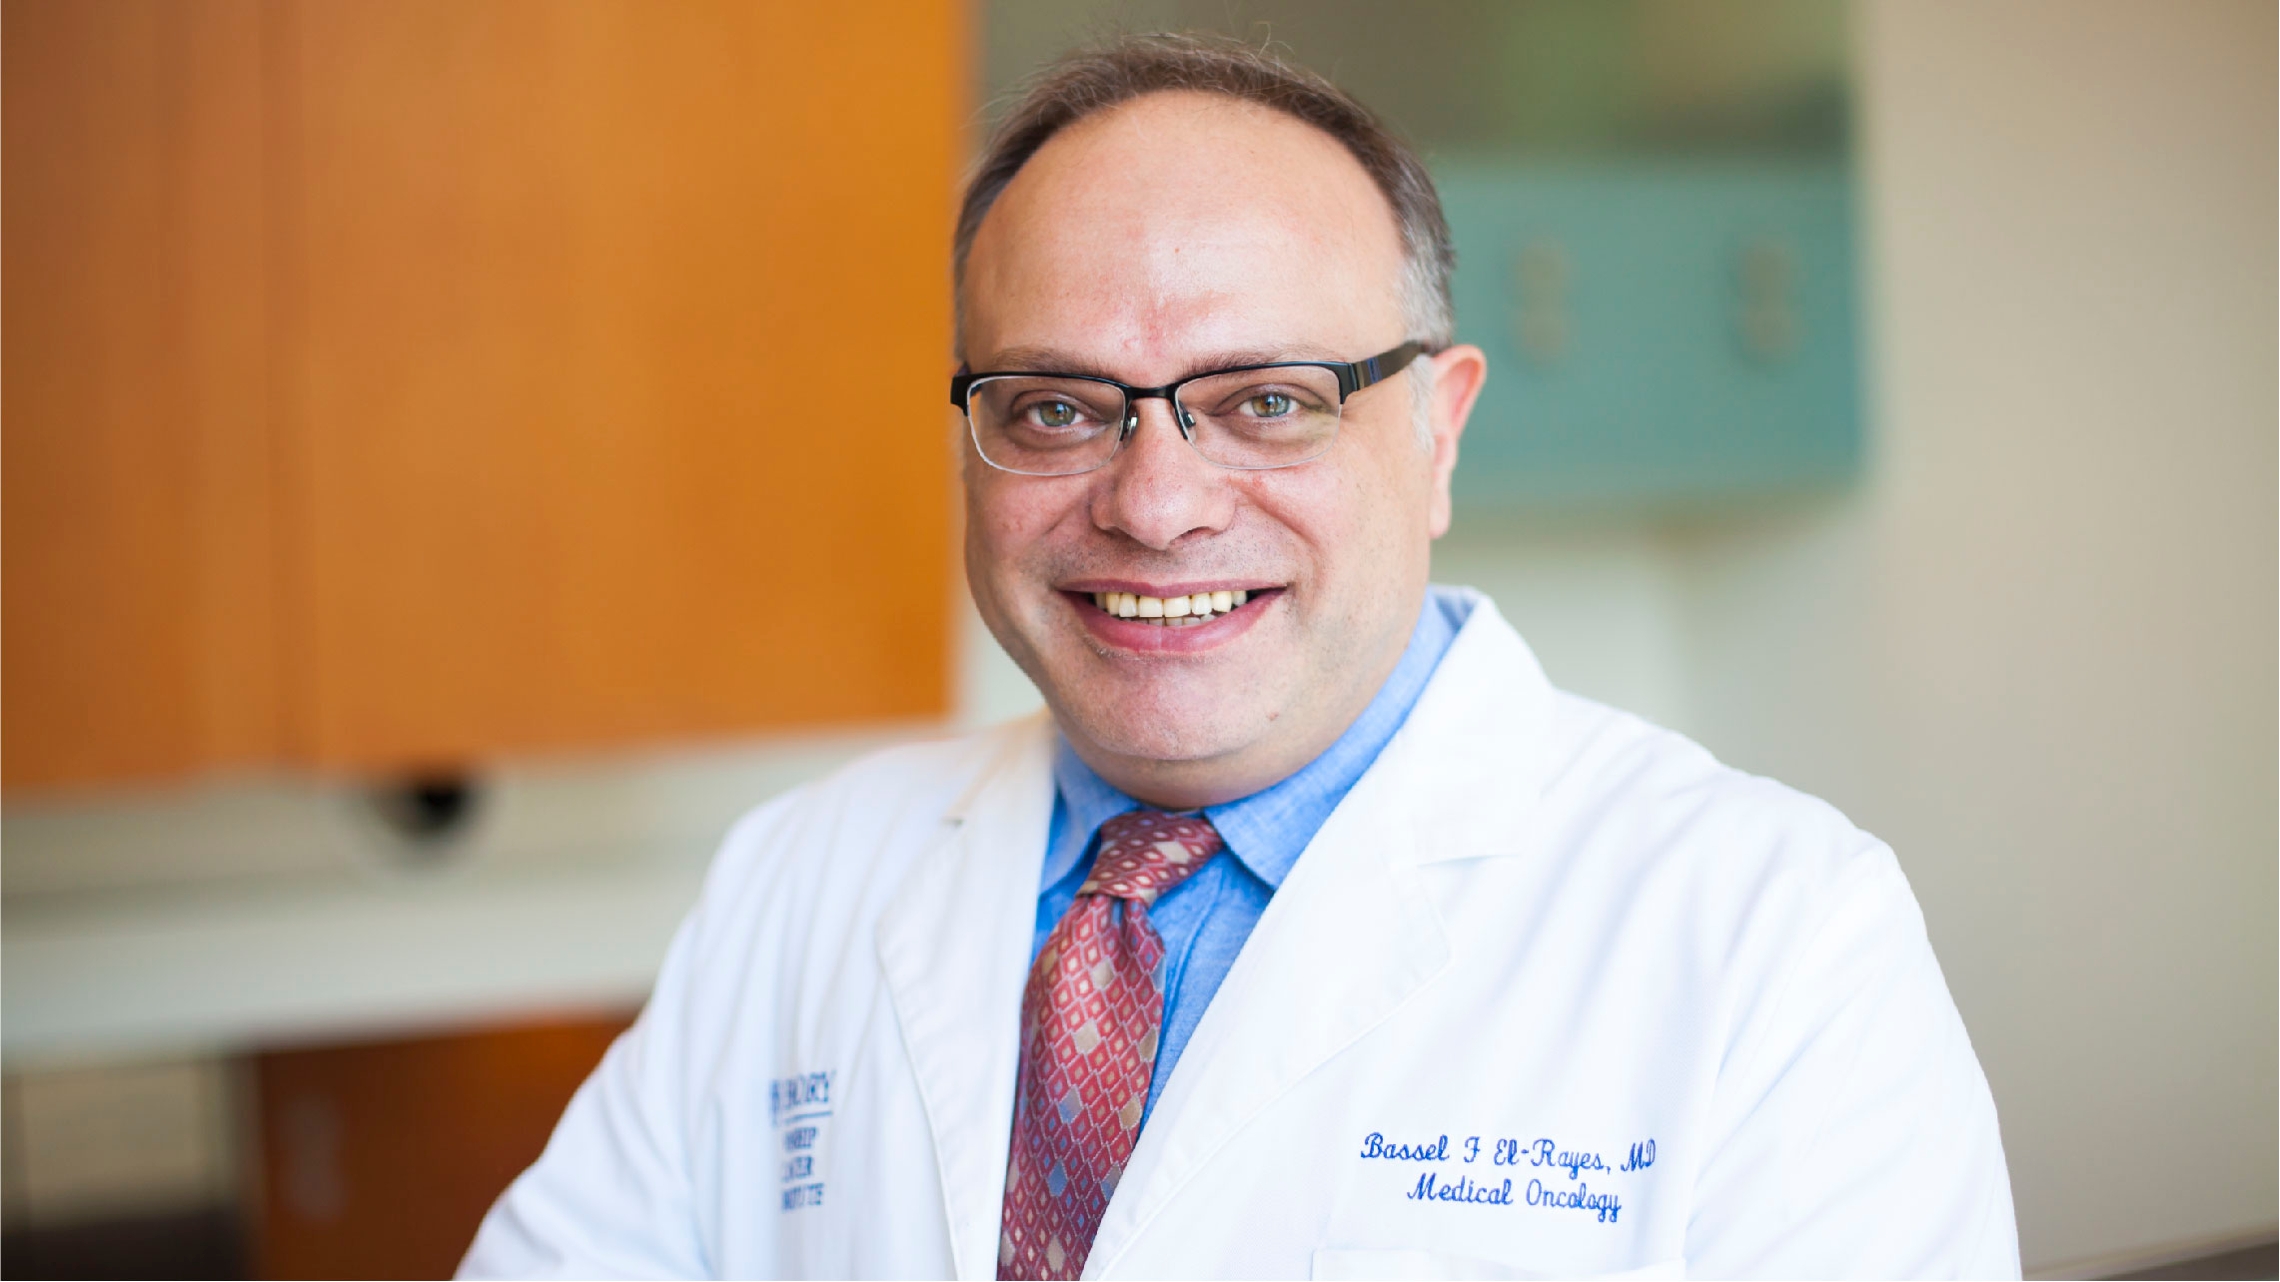 Dr. El-Rayes, chief clinical research scientist responsible for coordinating and providing high-level direction to the clinical cancer research programs